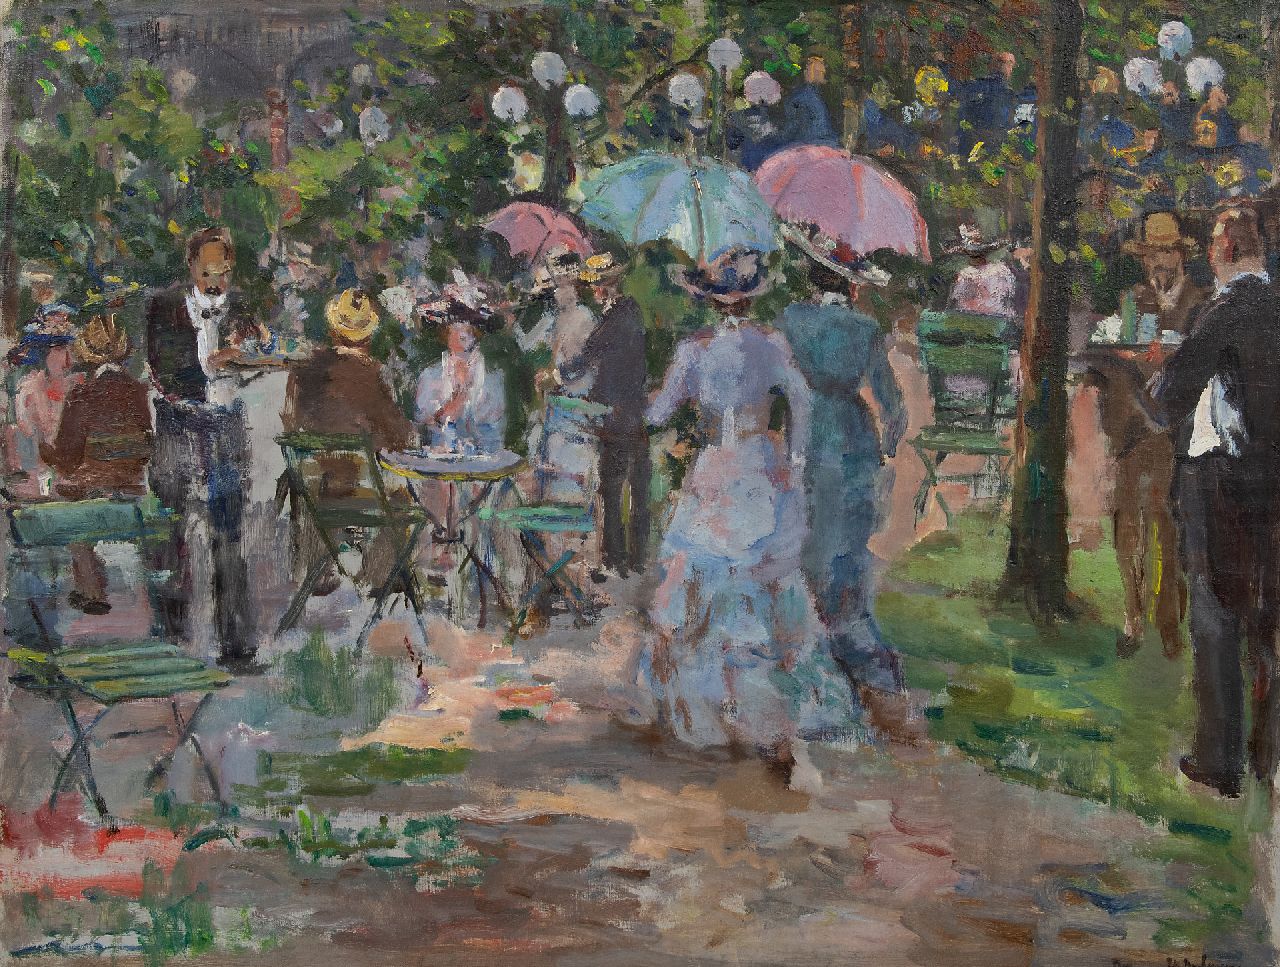 Neuburger E.  | Eliazer 'Elie' Neuburger, A concert in the garden of the Galerij, Amsterdam, 6 March 1910, oil on canvas 64.9 x 85.0 cm, signed l.r. and pained ca. 1910